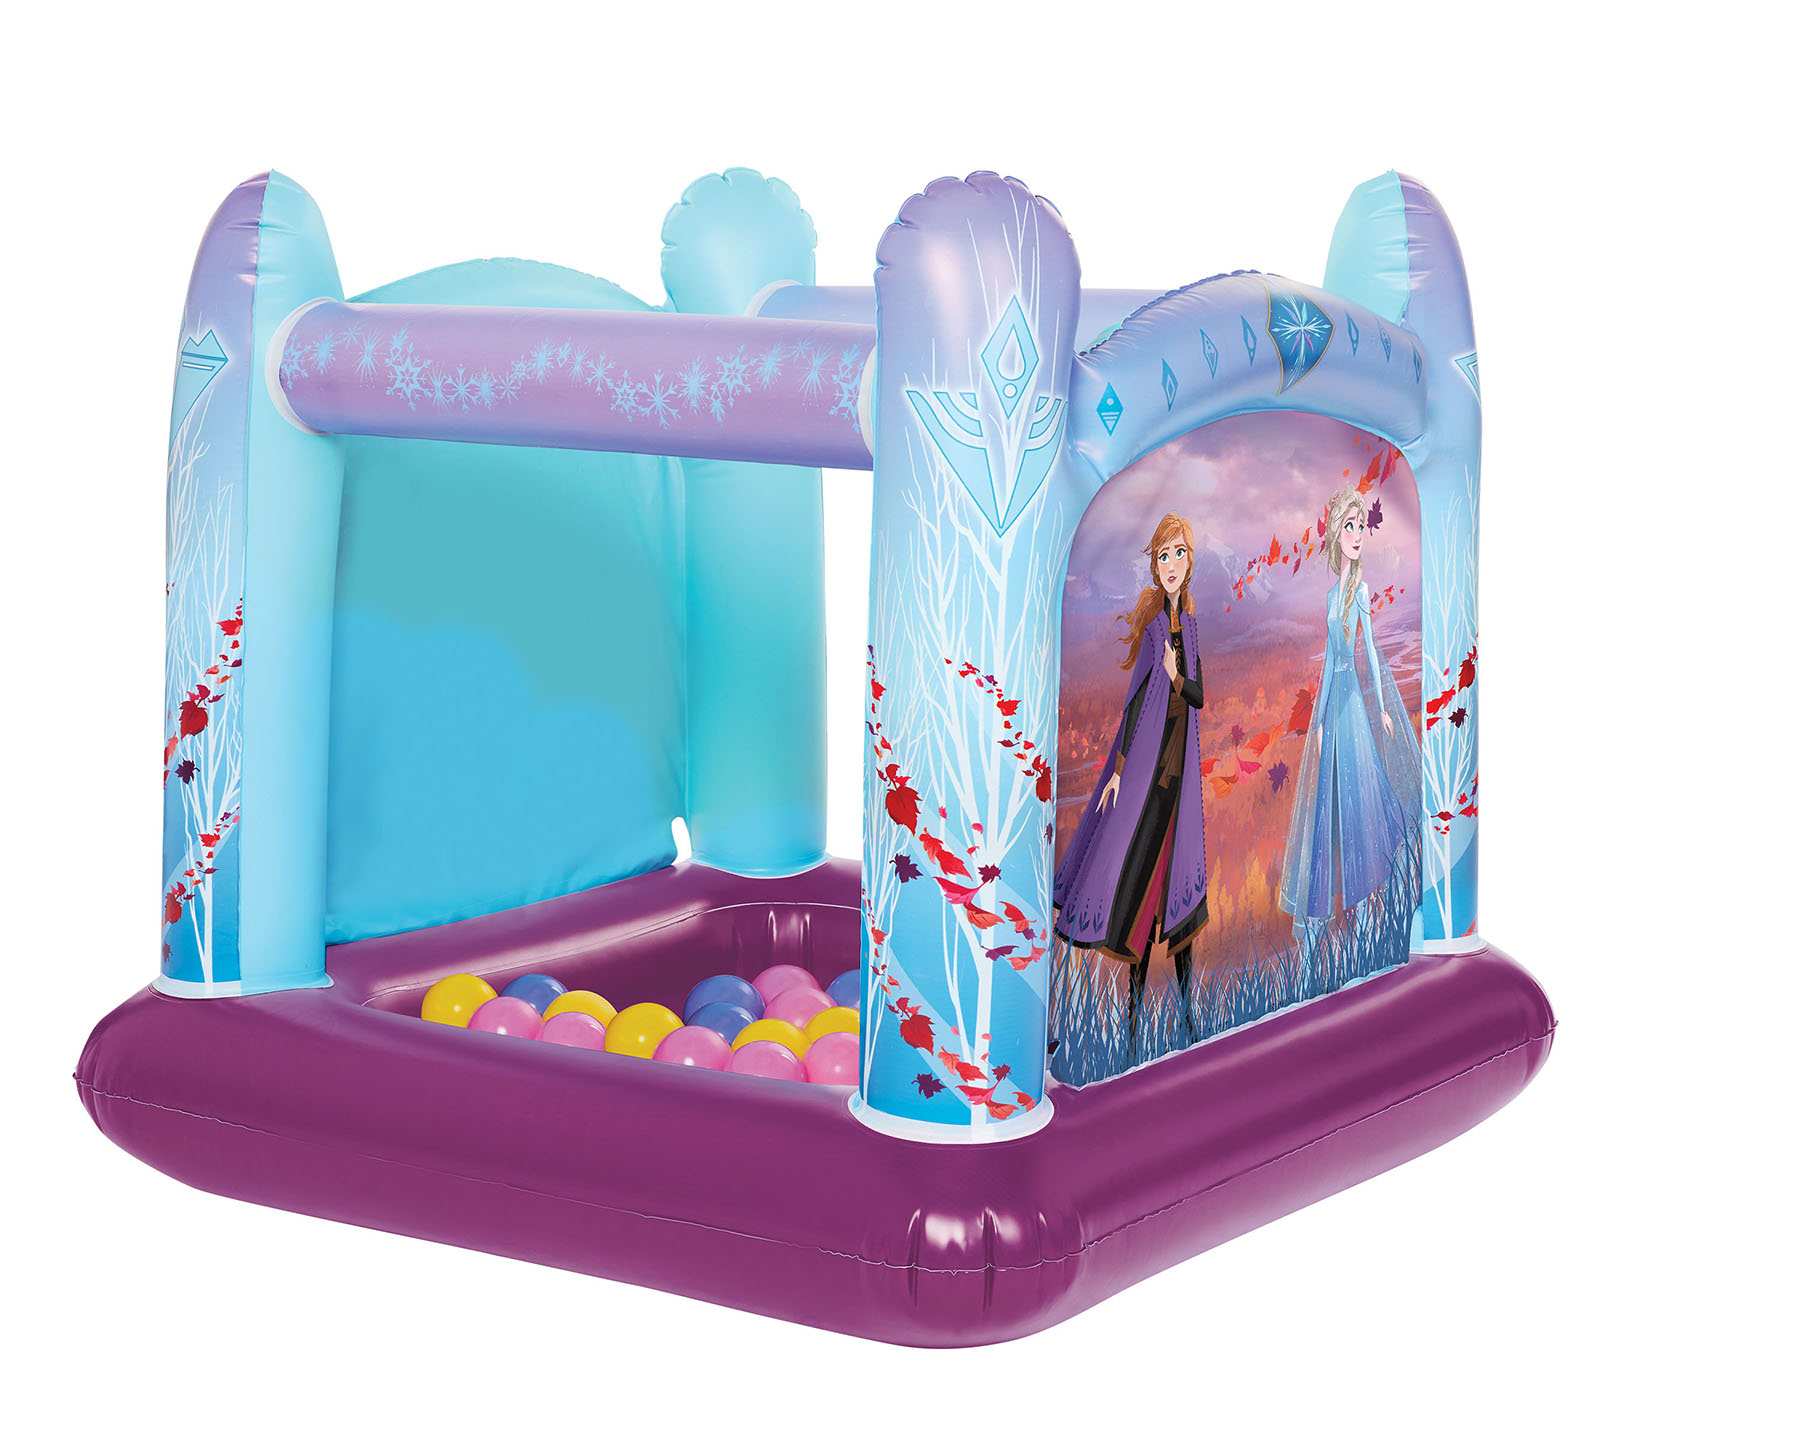 Disney Frozen 2: Playland Inflatable Ball Pit with 20 Balls - image 2 of 4